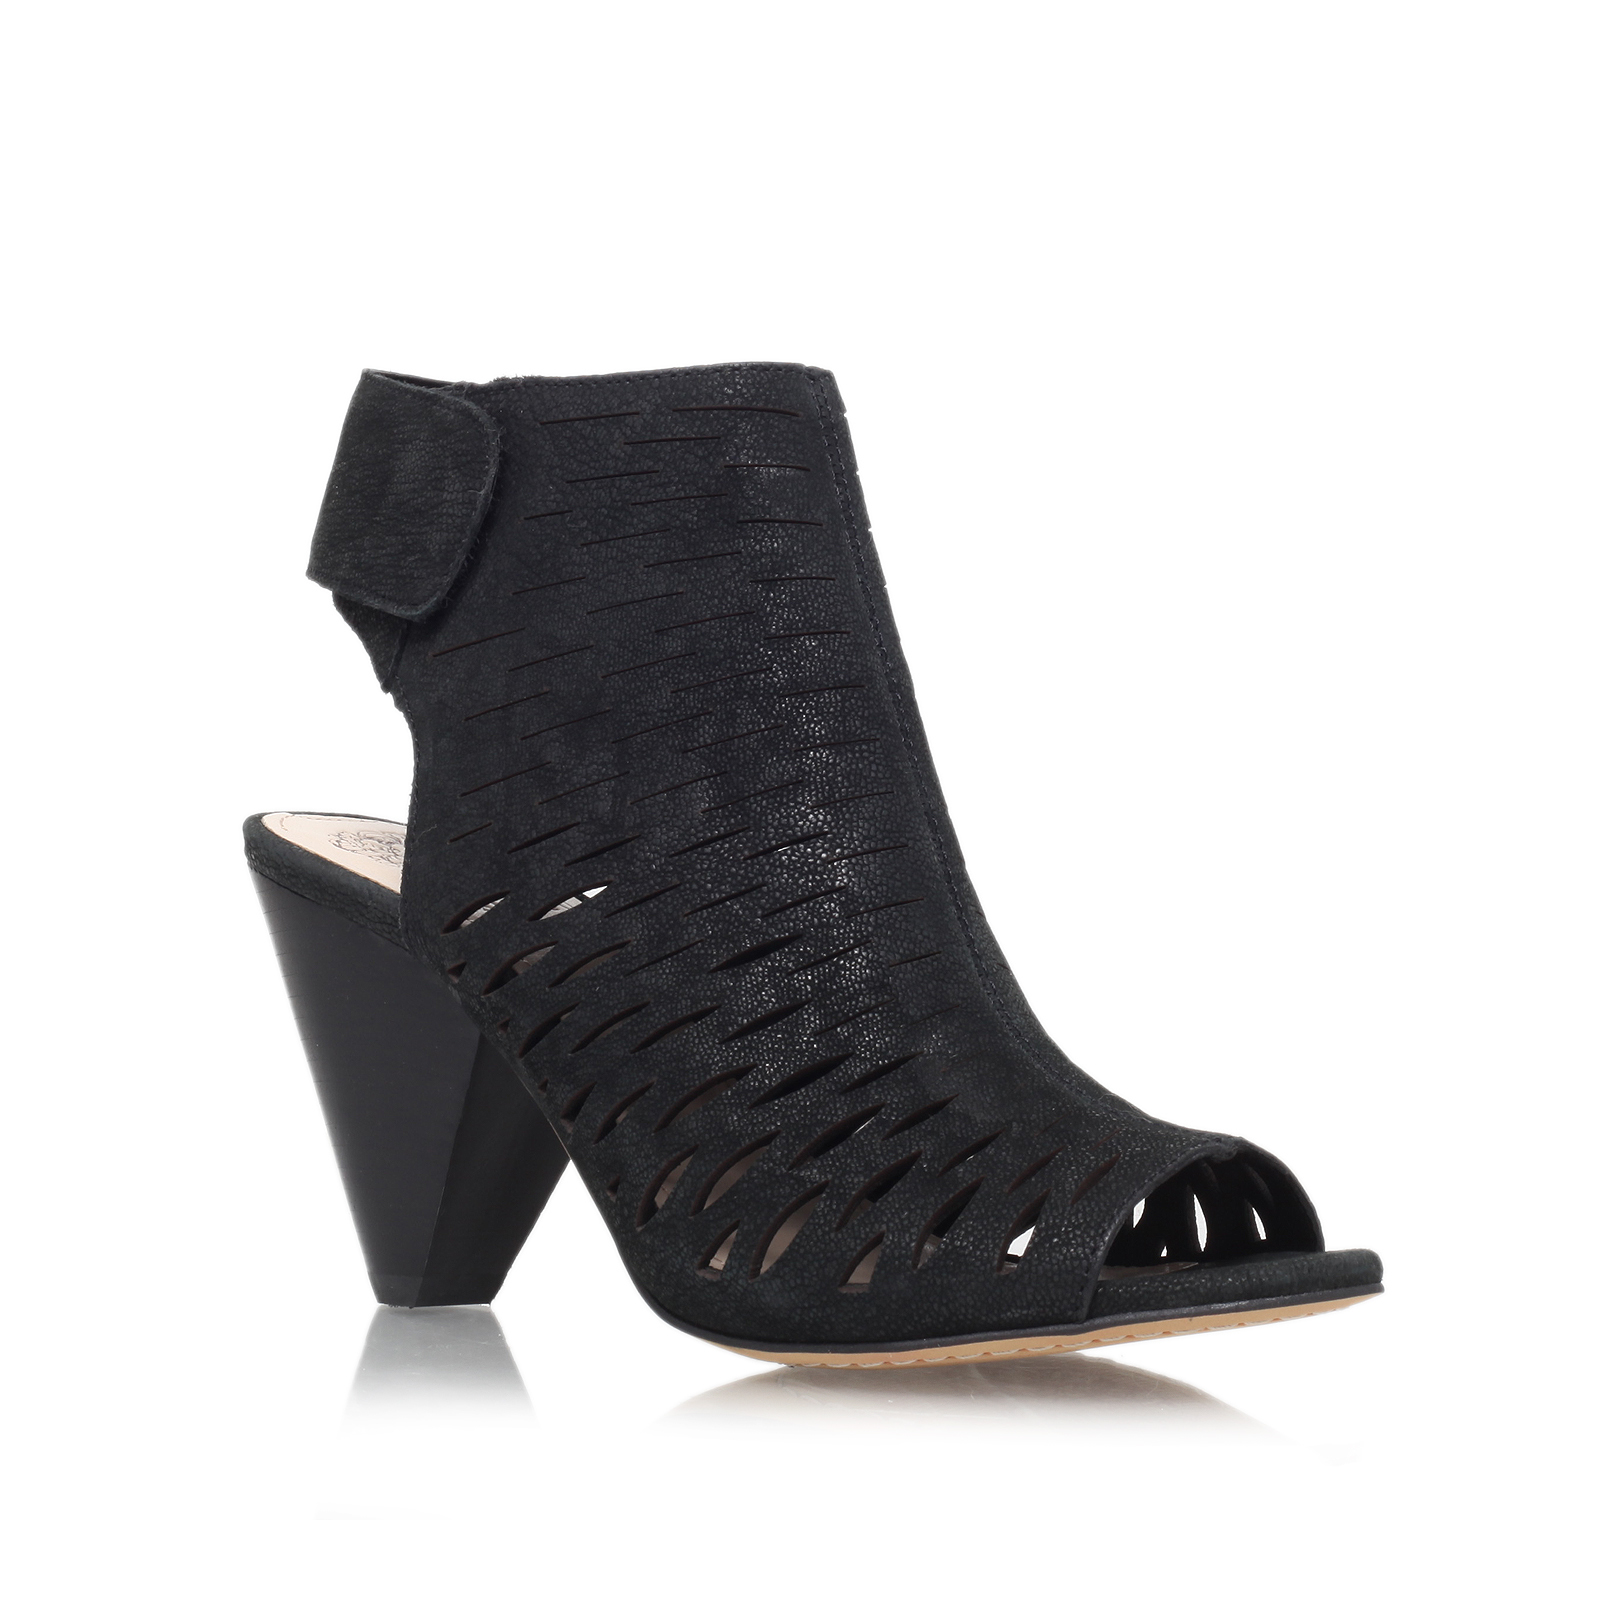 Vince Camuto | ESTELL Black Mid Heel Sandals by VINCE CAMUTO